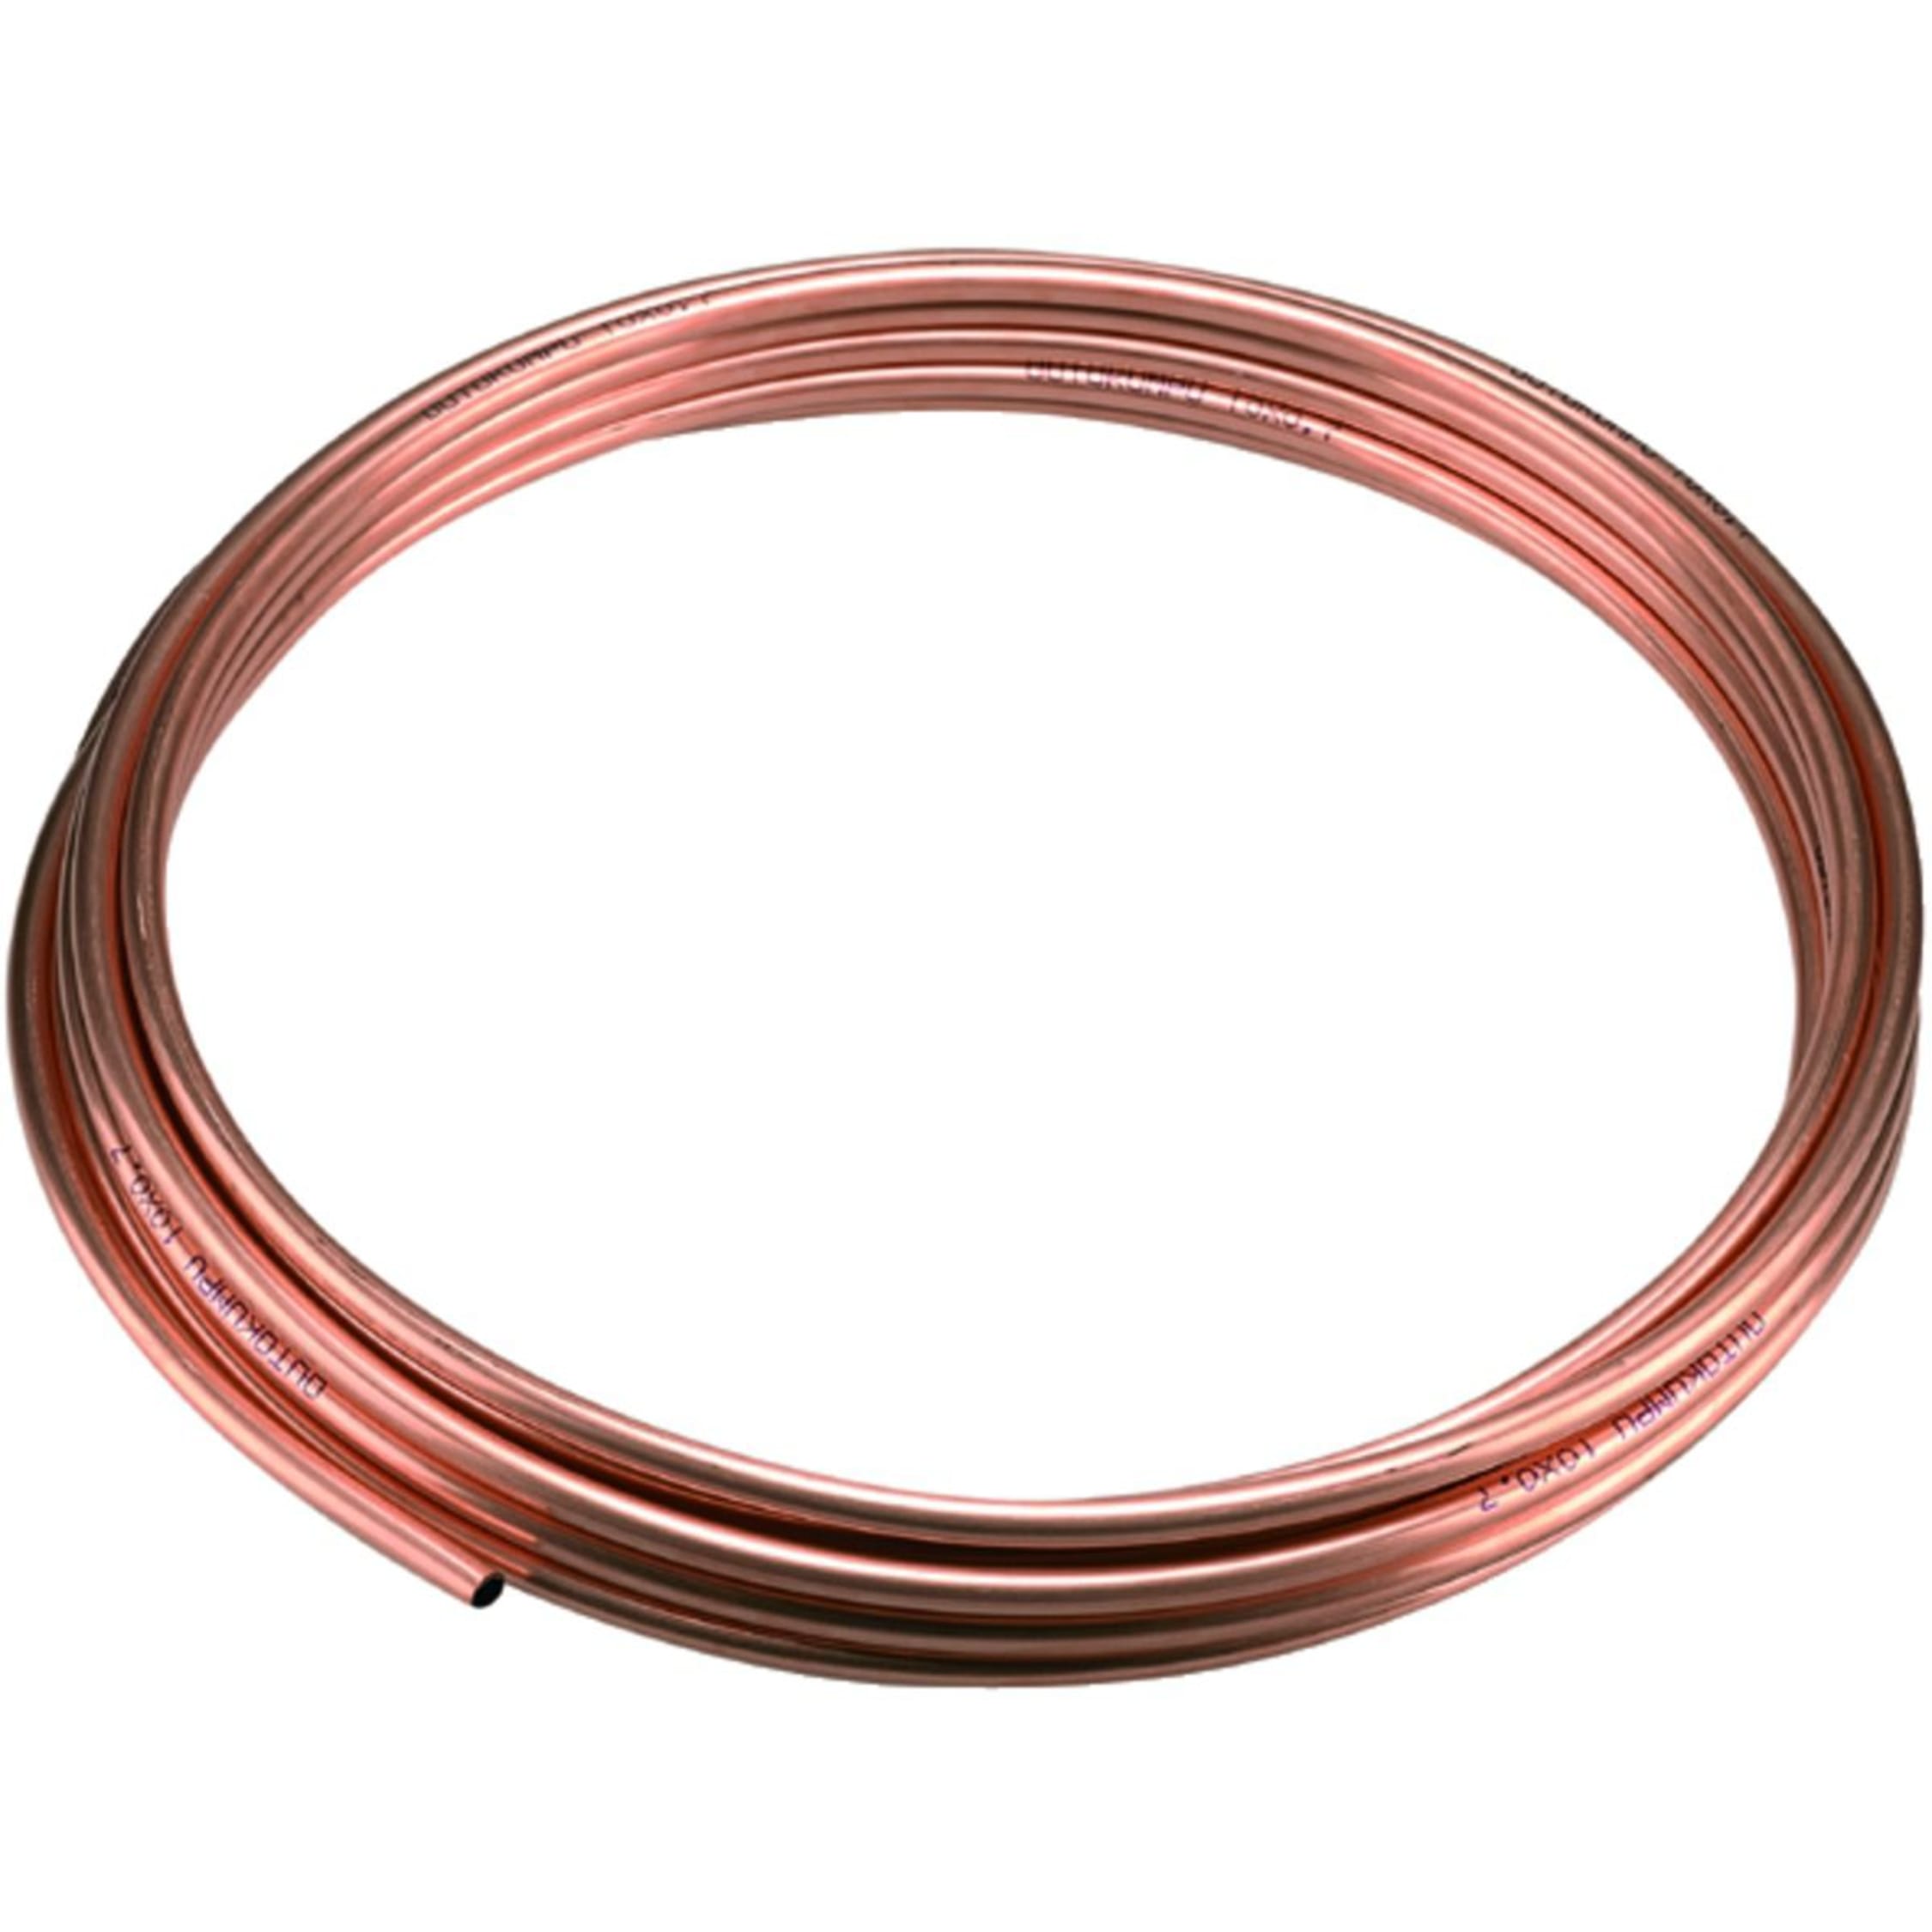 10MM YORKSHIRE 10MTR  MICROBORE COPPER PIPE/TUBE GAS/WATER/HEATING//OIL NEW 